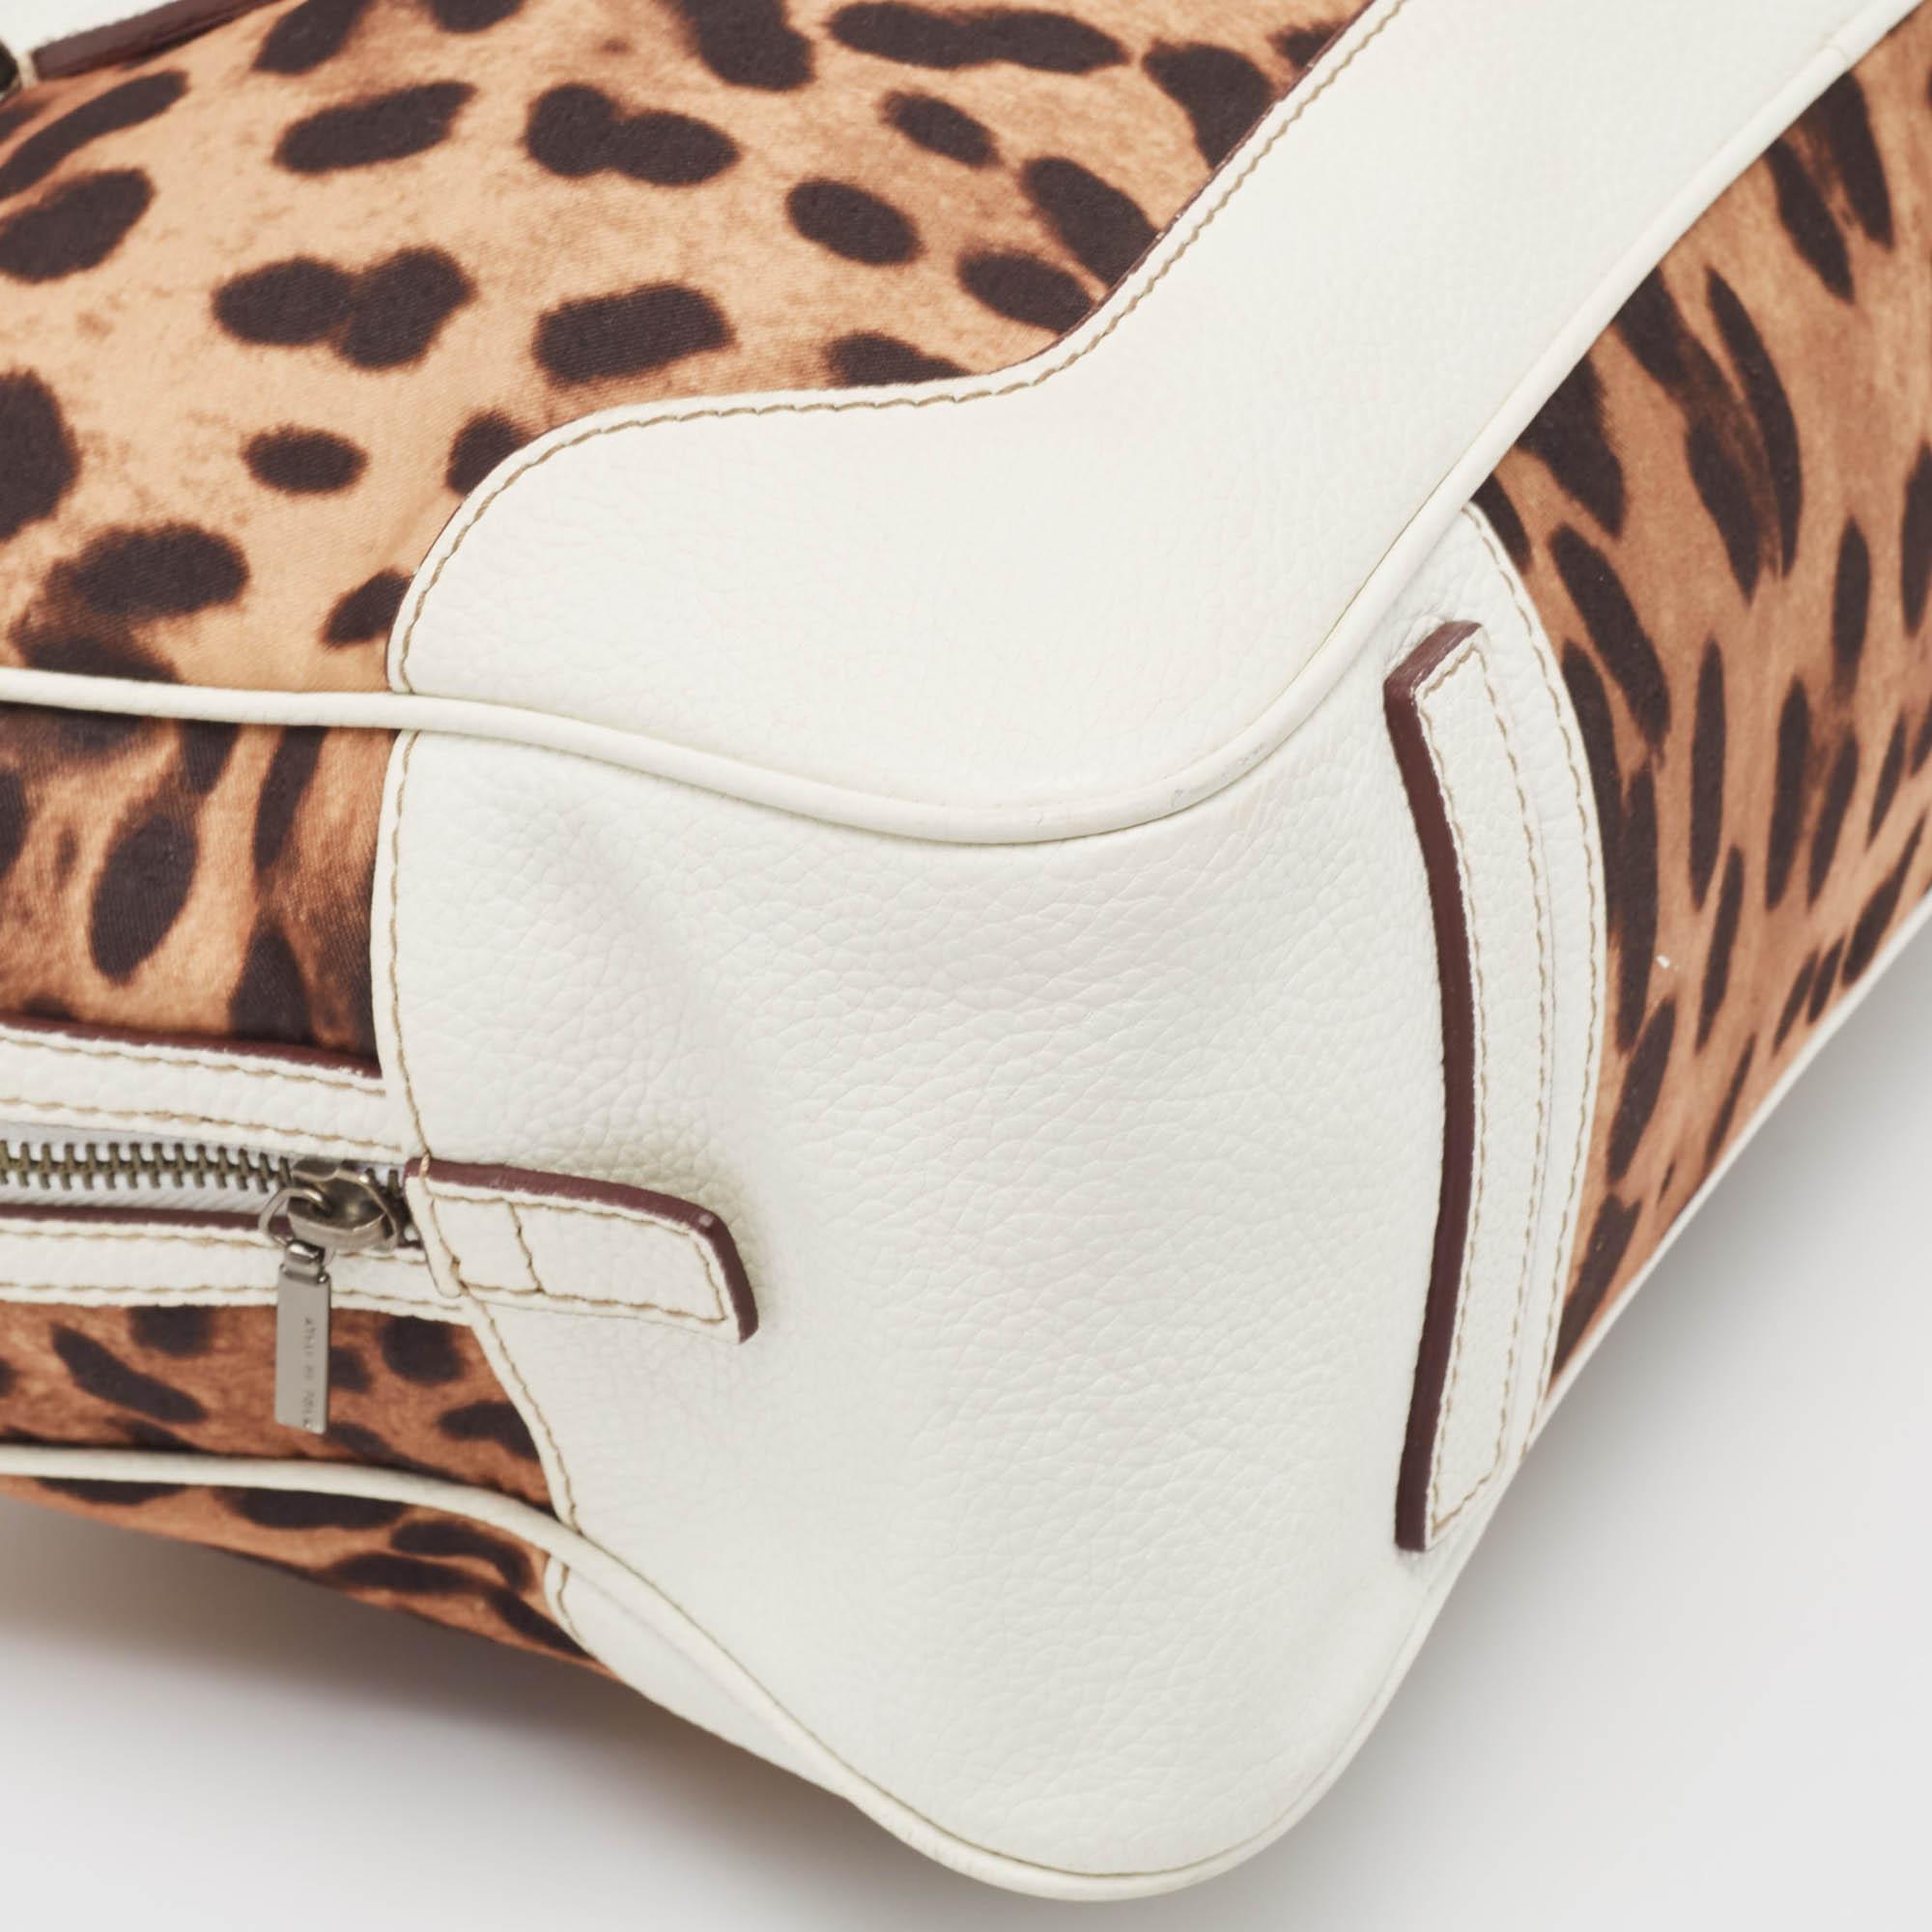 Women's Dolce & Gabbana White/Brown Leopard Print Canvas and Leather Logo Satchel For Sale